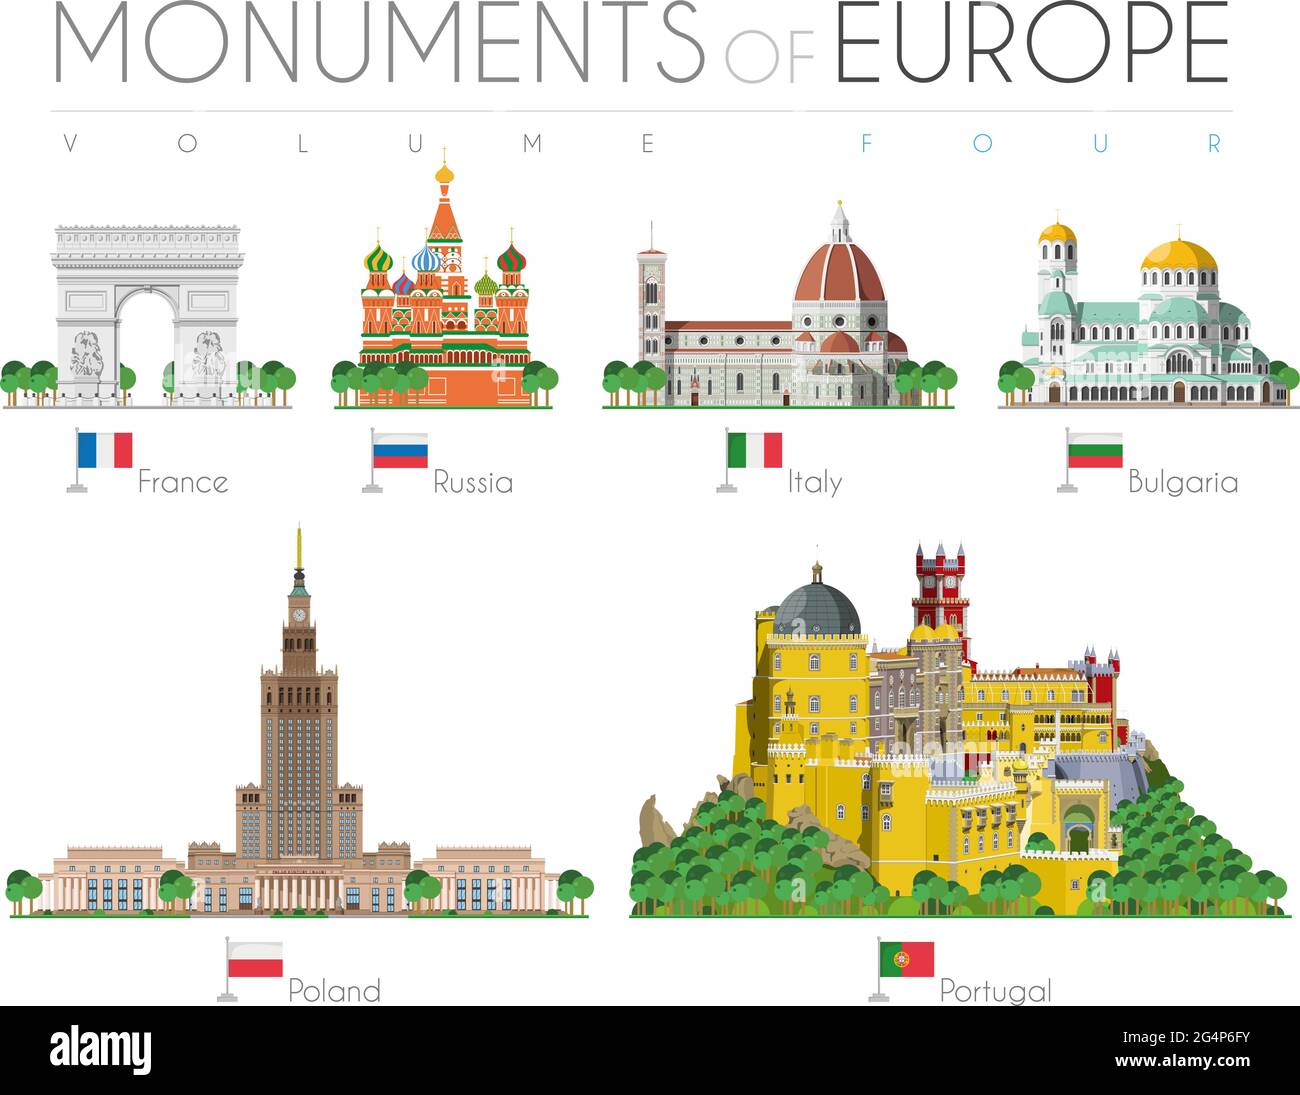 Monuments of Europe in cartoon style Volume 4: Arch of Triumph (France), Saint Basils Cathedral (Russia), Santa Maria dei Fiore (Italy), Alexander Nev Stock Vector